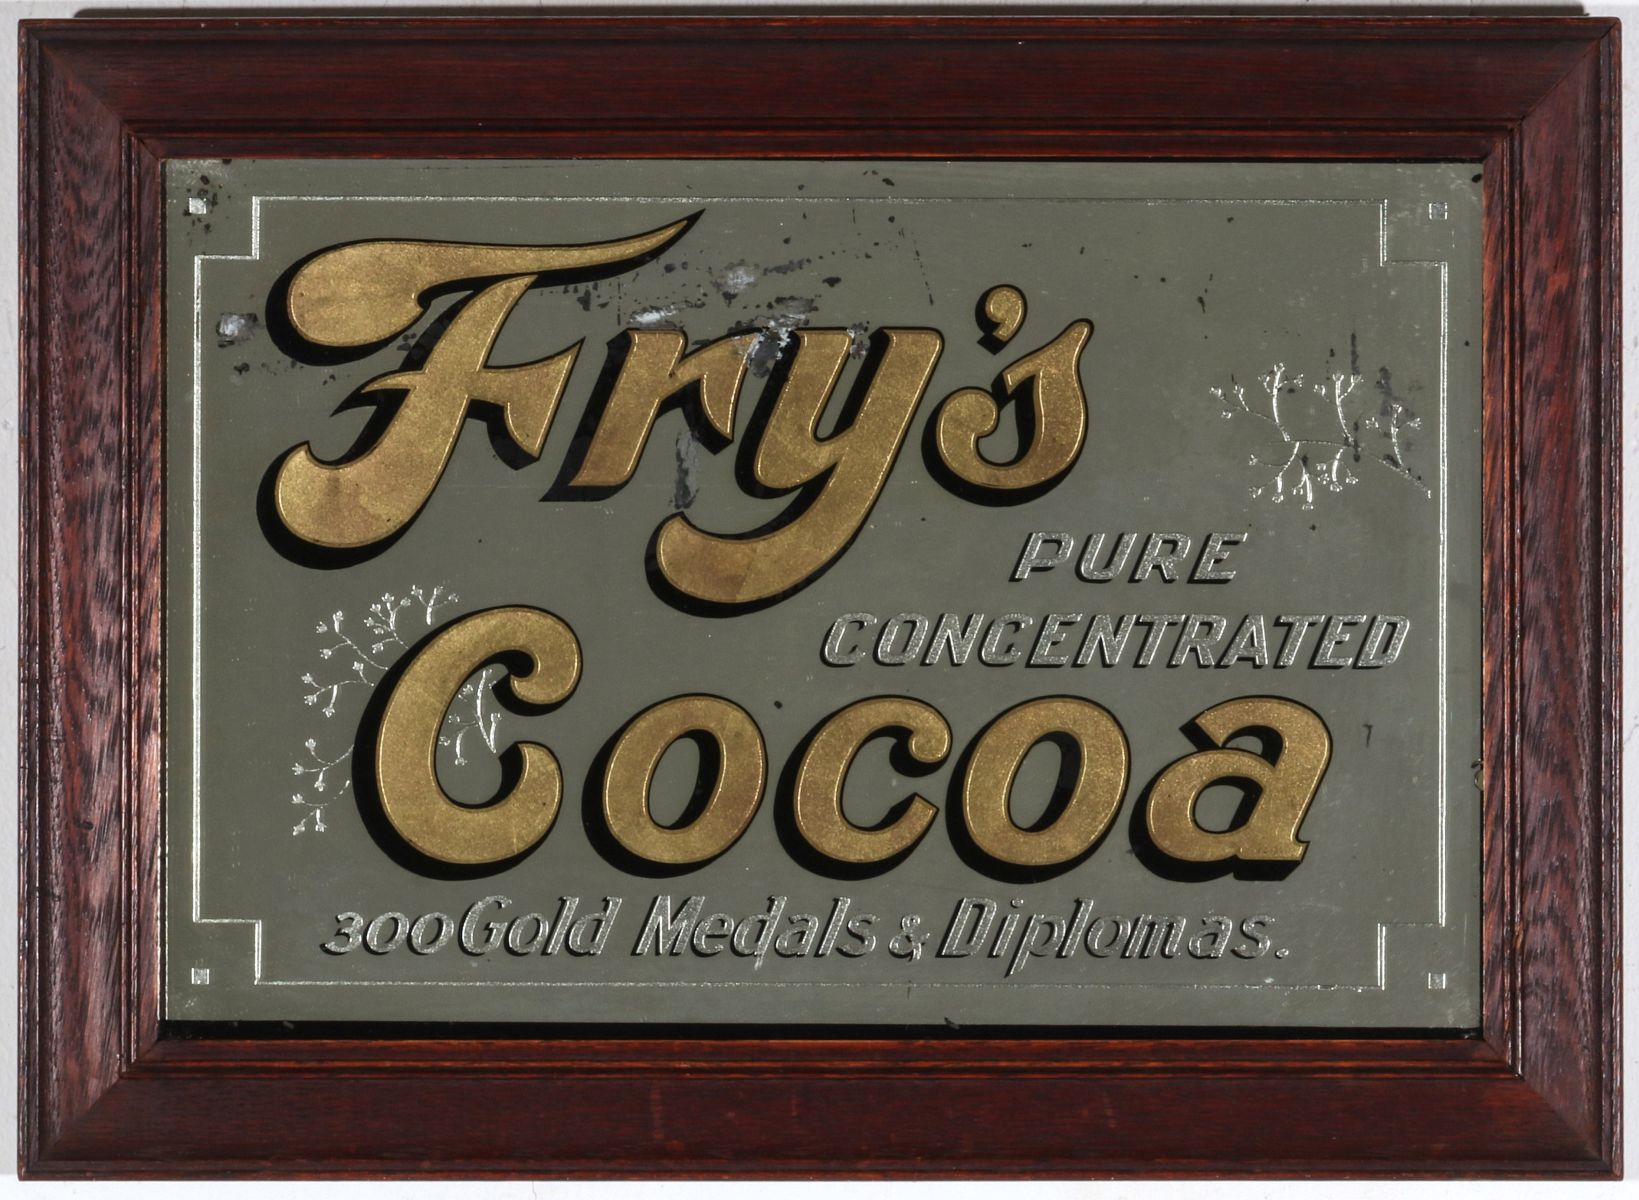 A FRY'S COCOA REVERSE PAINTED ADVERTISING SIGN